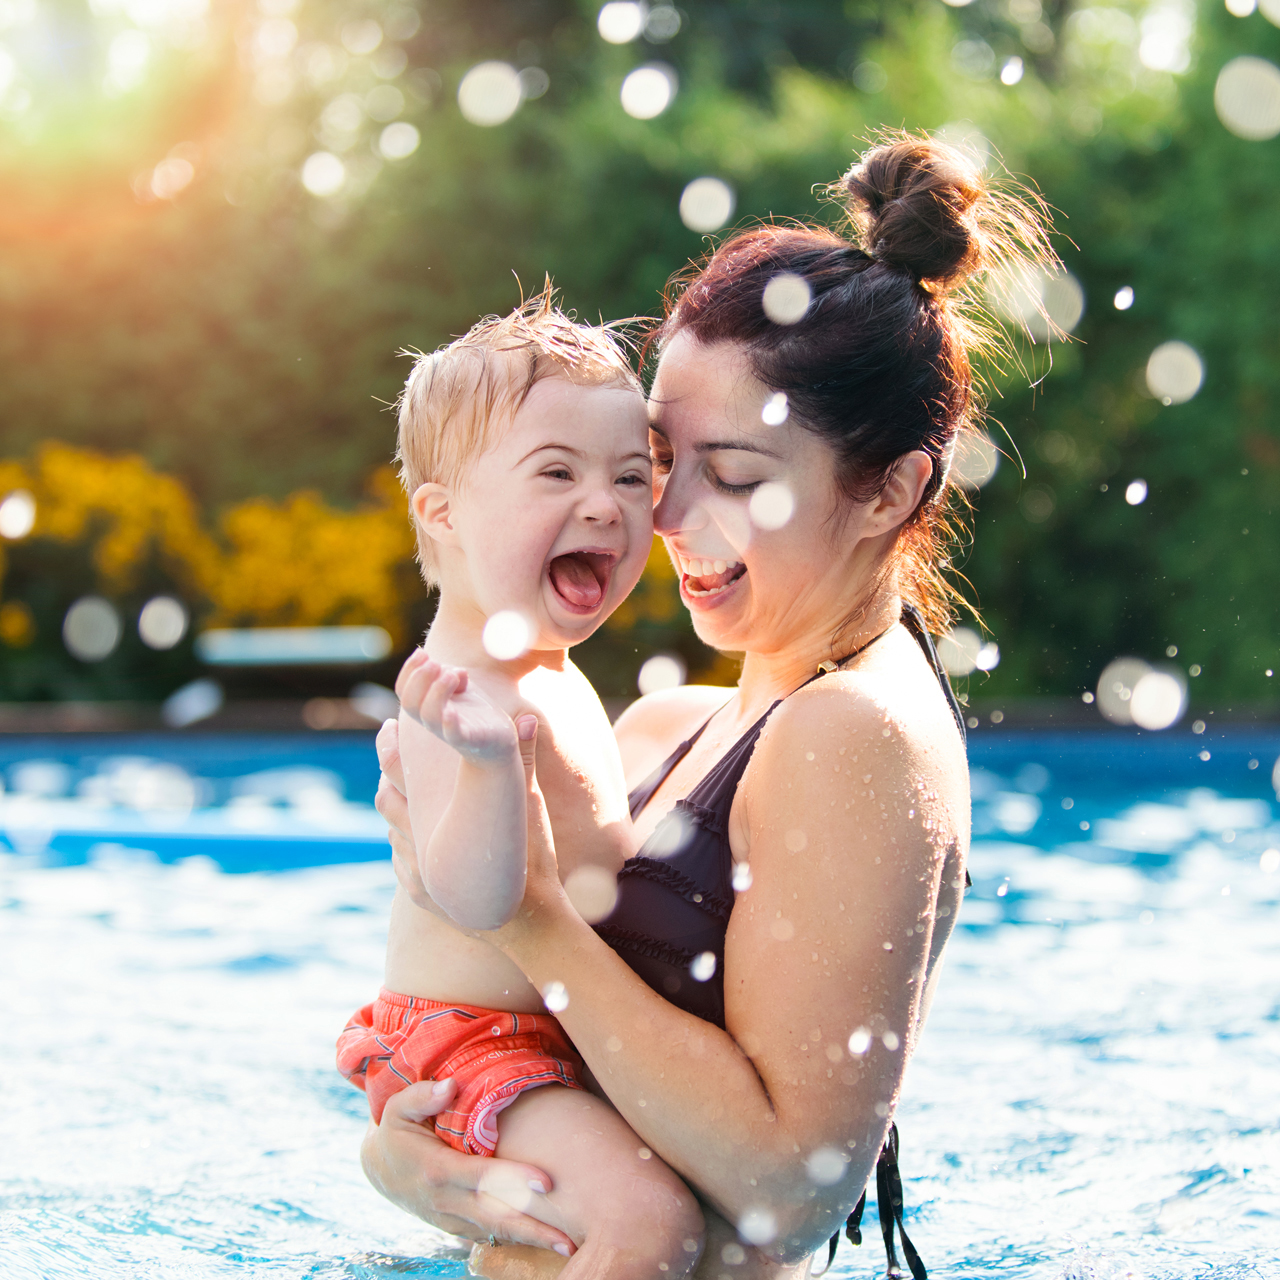 Woman holding son in pool